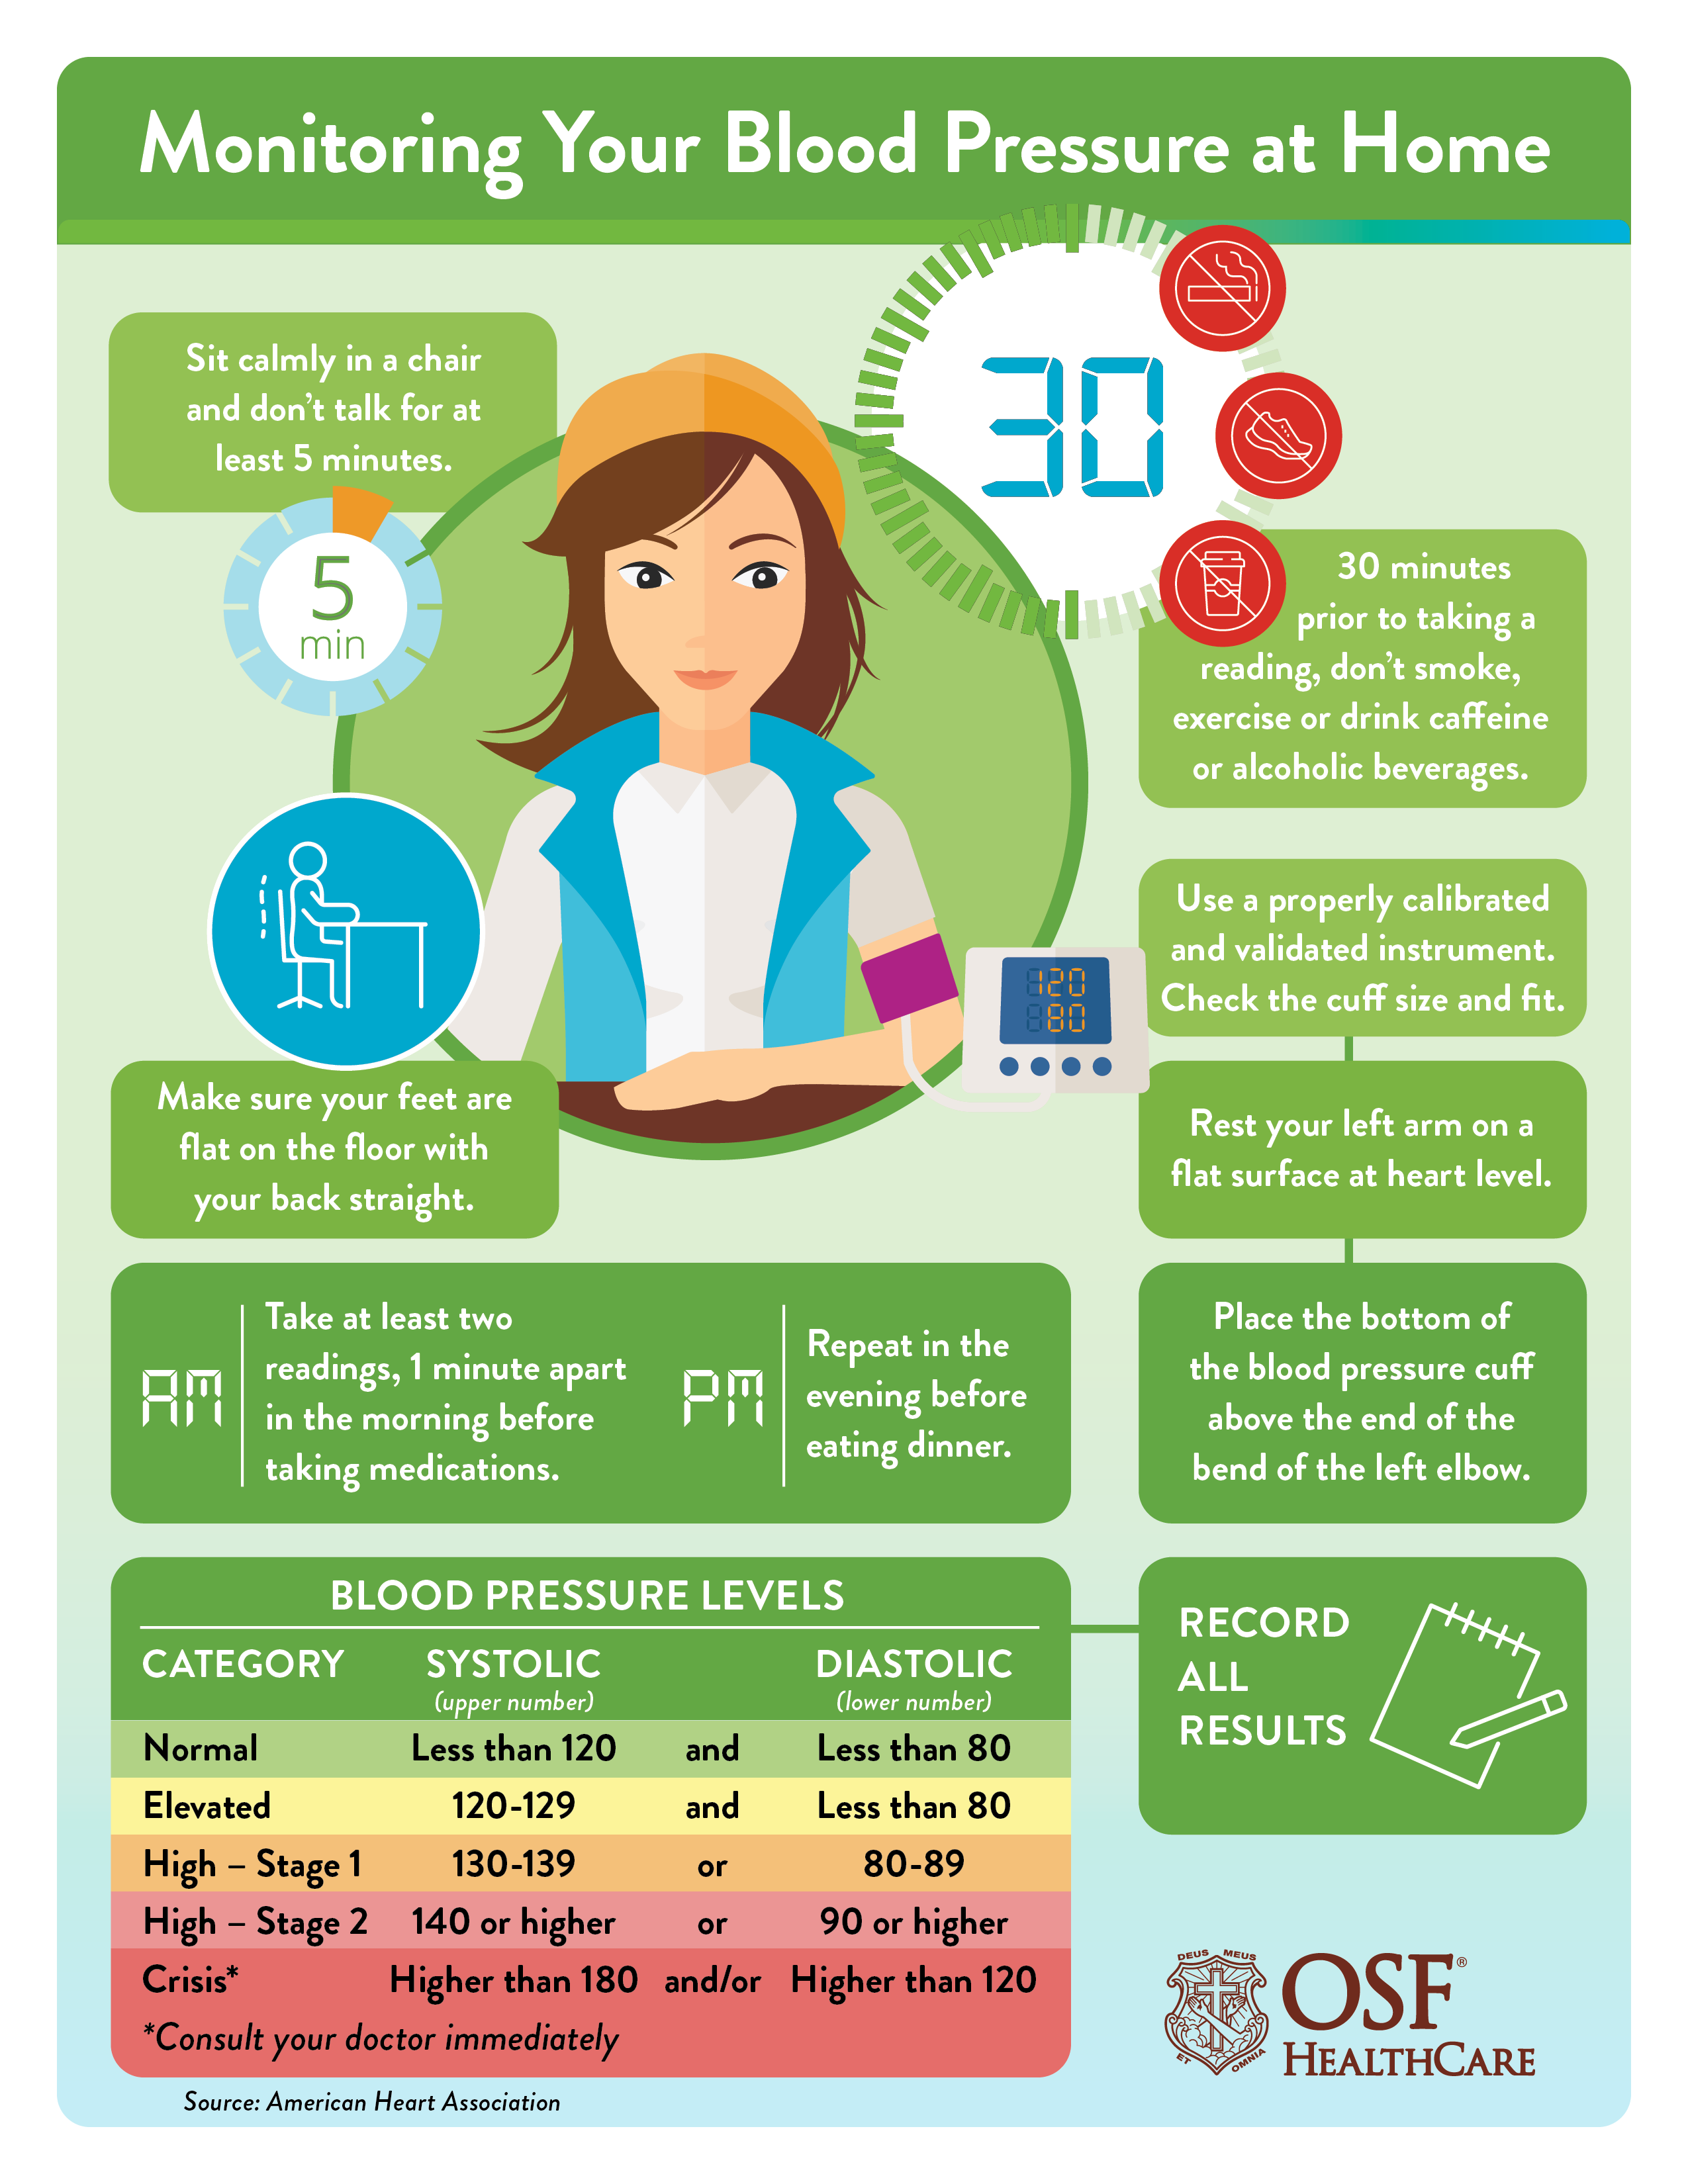 https://www.osfhealthcare.org/blog/wp-content/uploads/2021/03/Monitoring-Blood-Pressure-at-Home-Infographic.png